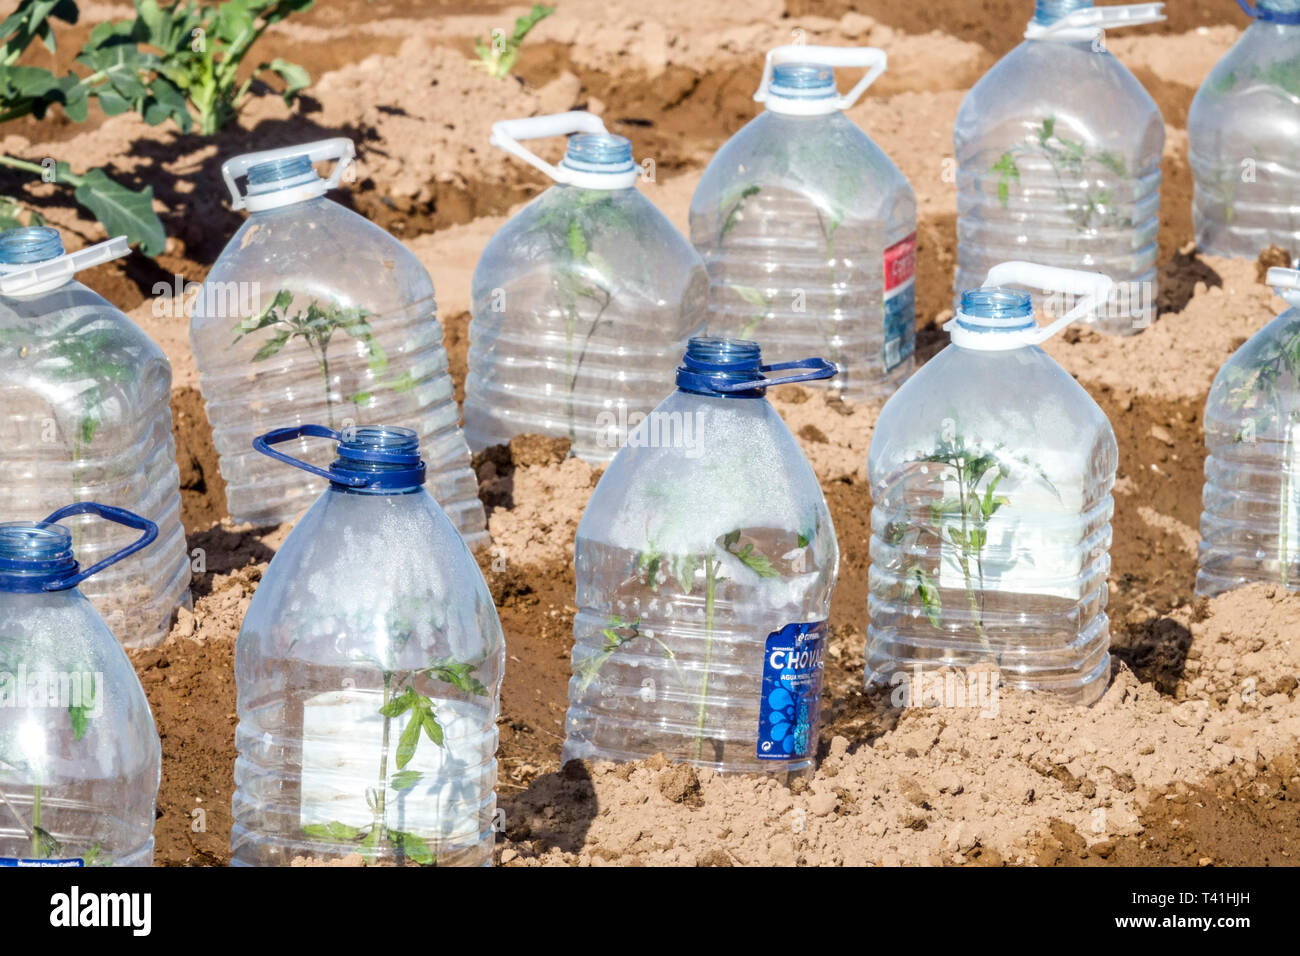 Plastic bottles protecting young plants from morning cold, allotment garden Spain growing vegetables Stock Photo